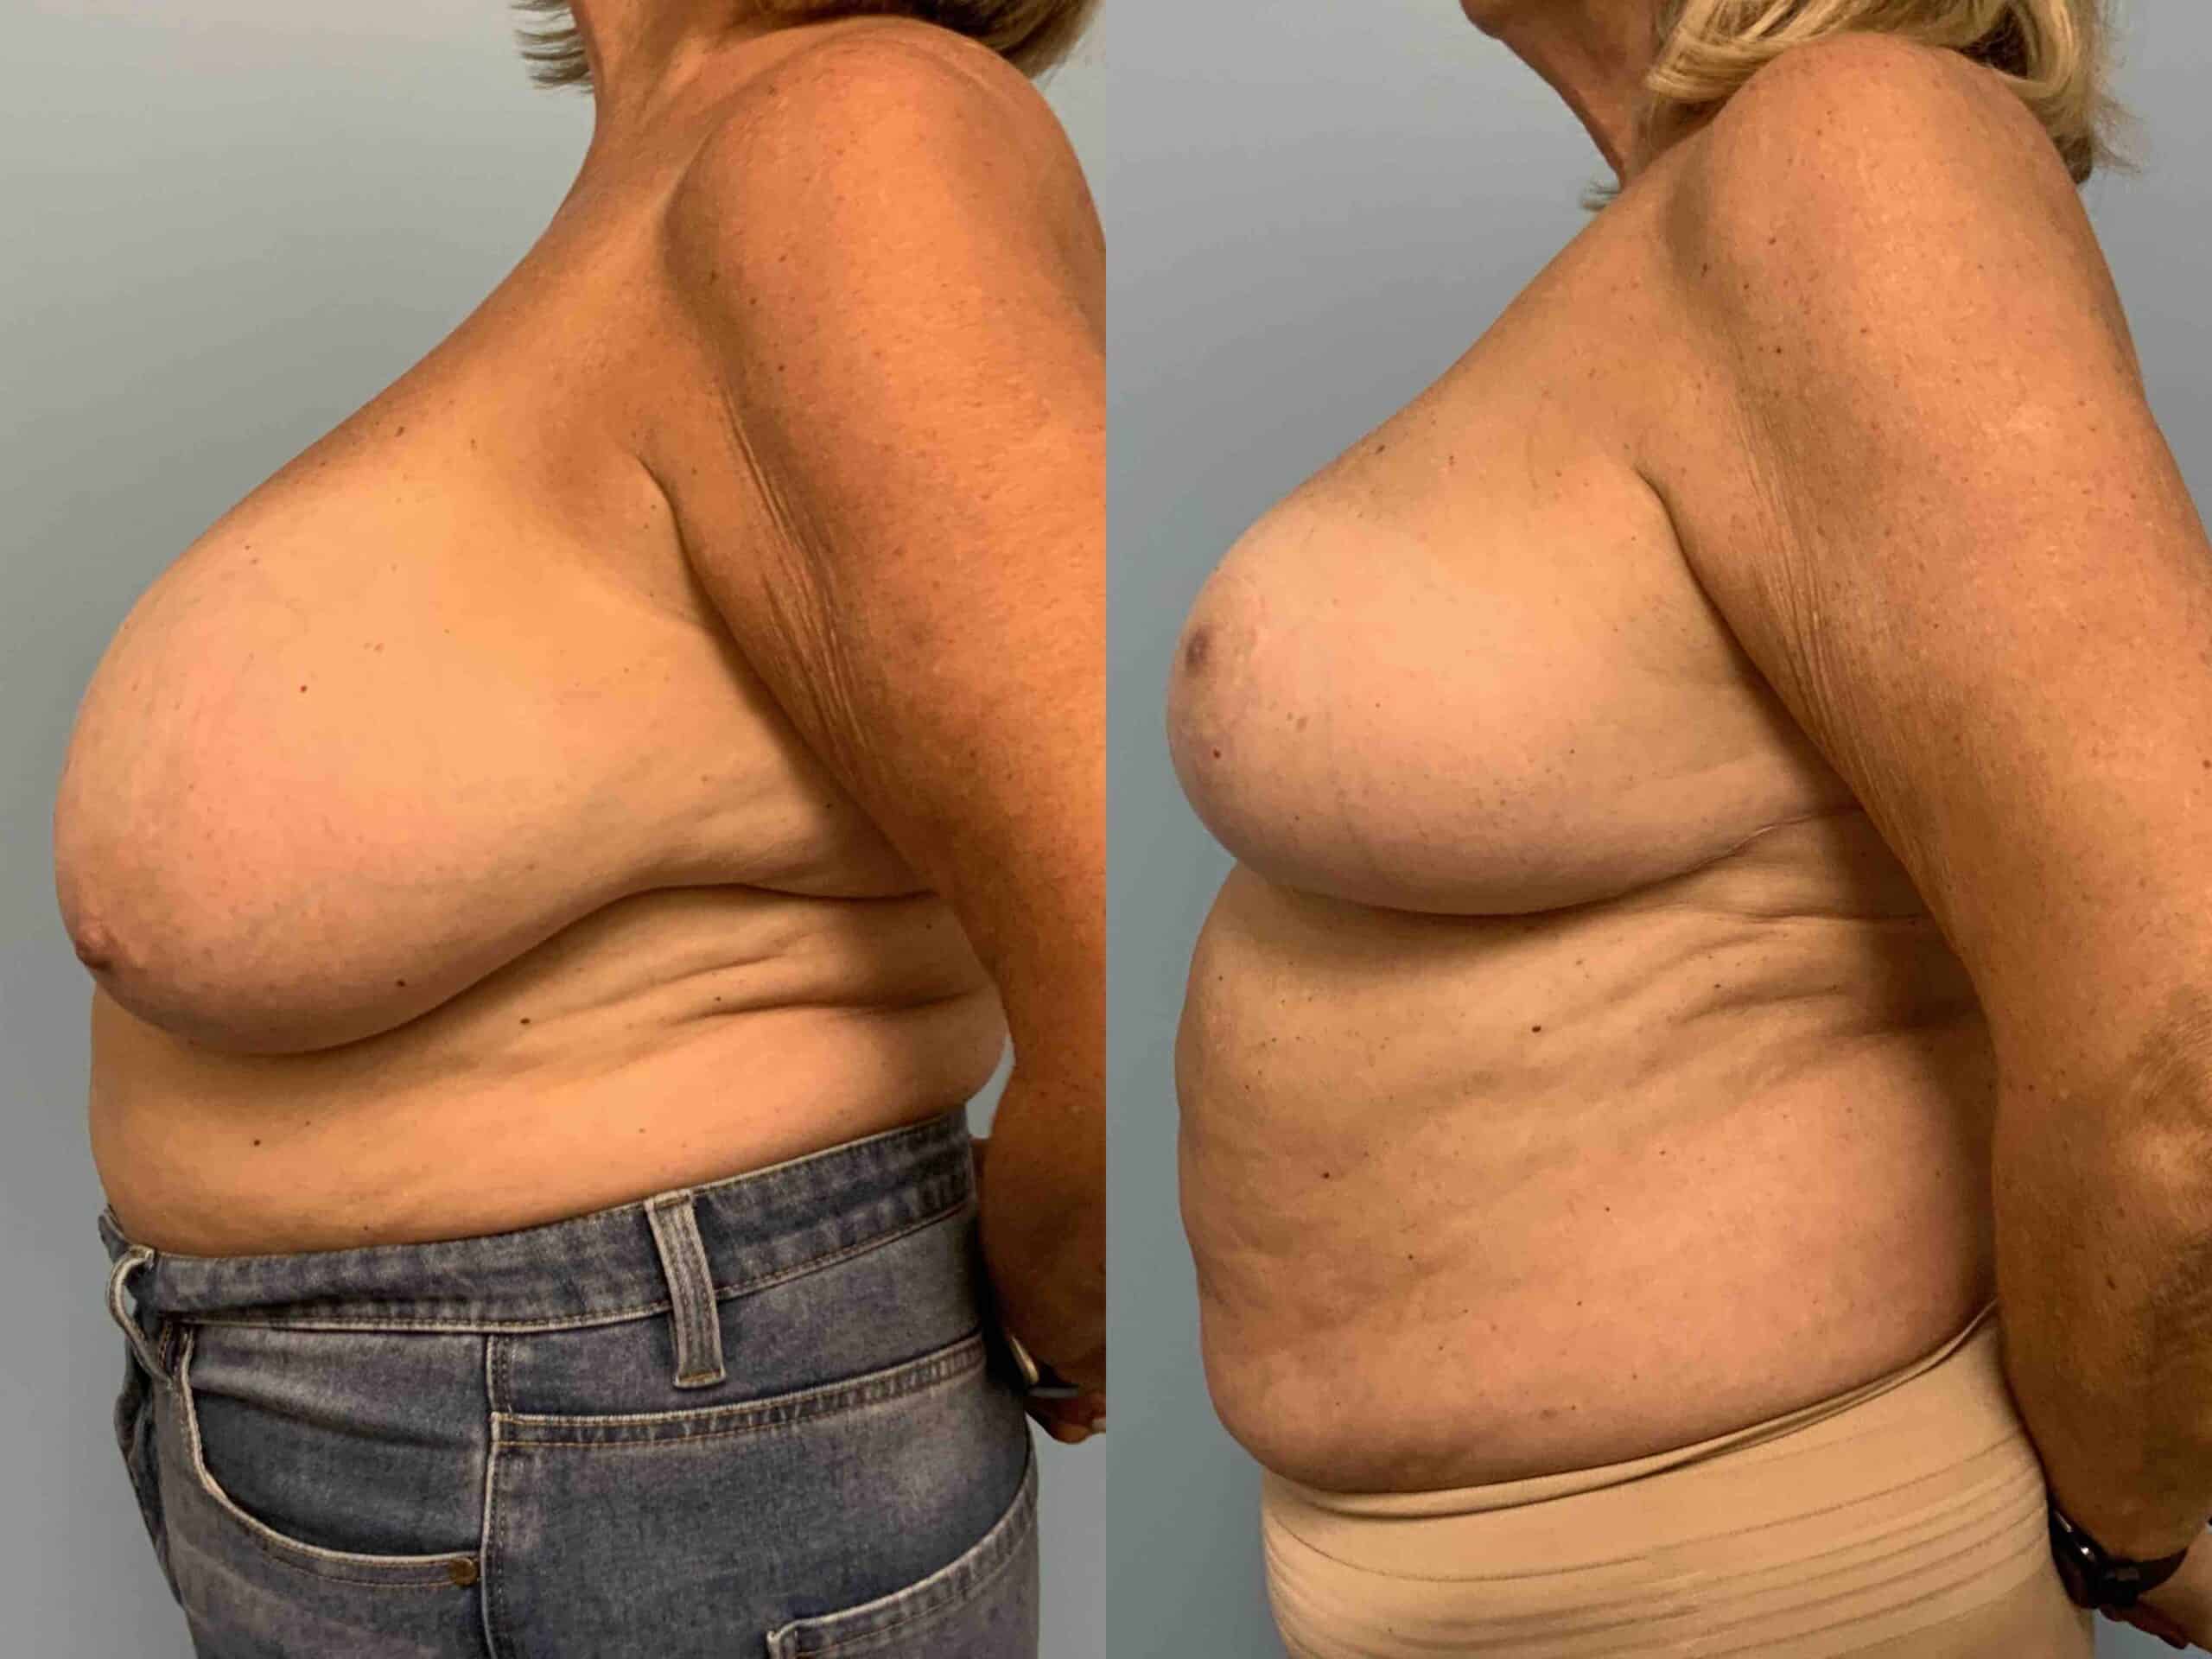 Before and after, patient 1 yr post op from Breast Reduction, VASER axilla, Axillary Roll Resection procedures performed by Dr. Paul Vanek